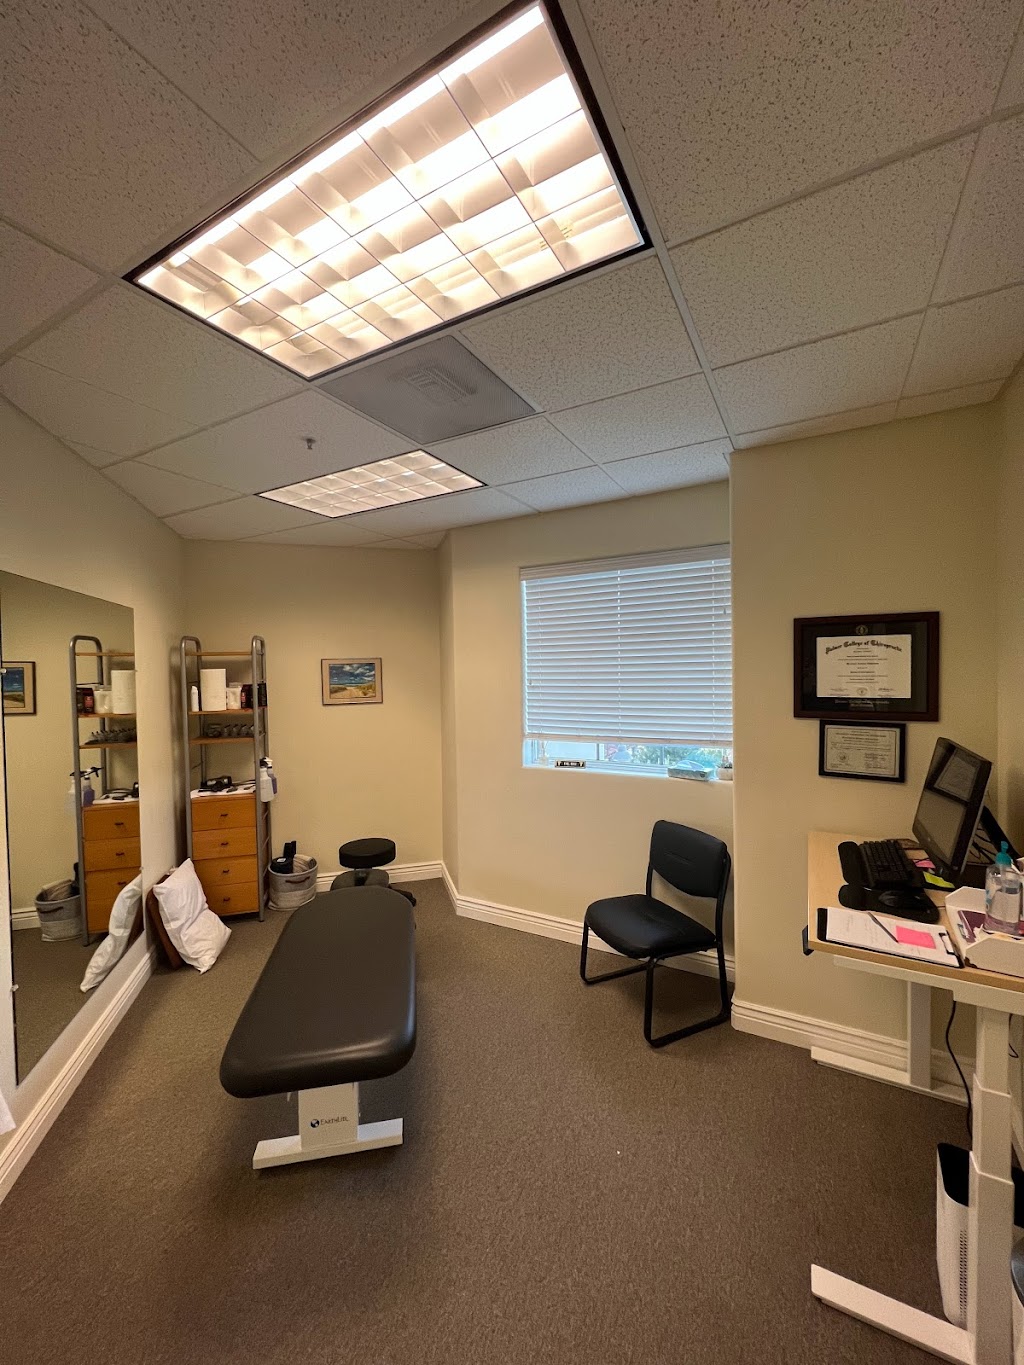 Active Spinal & Sports Care, Inc. | 18525 Sutter Blvd # 200, Morgan Hill, CA 95037, USA | Phone: (408) 779-3565